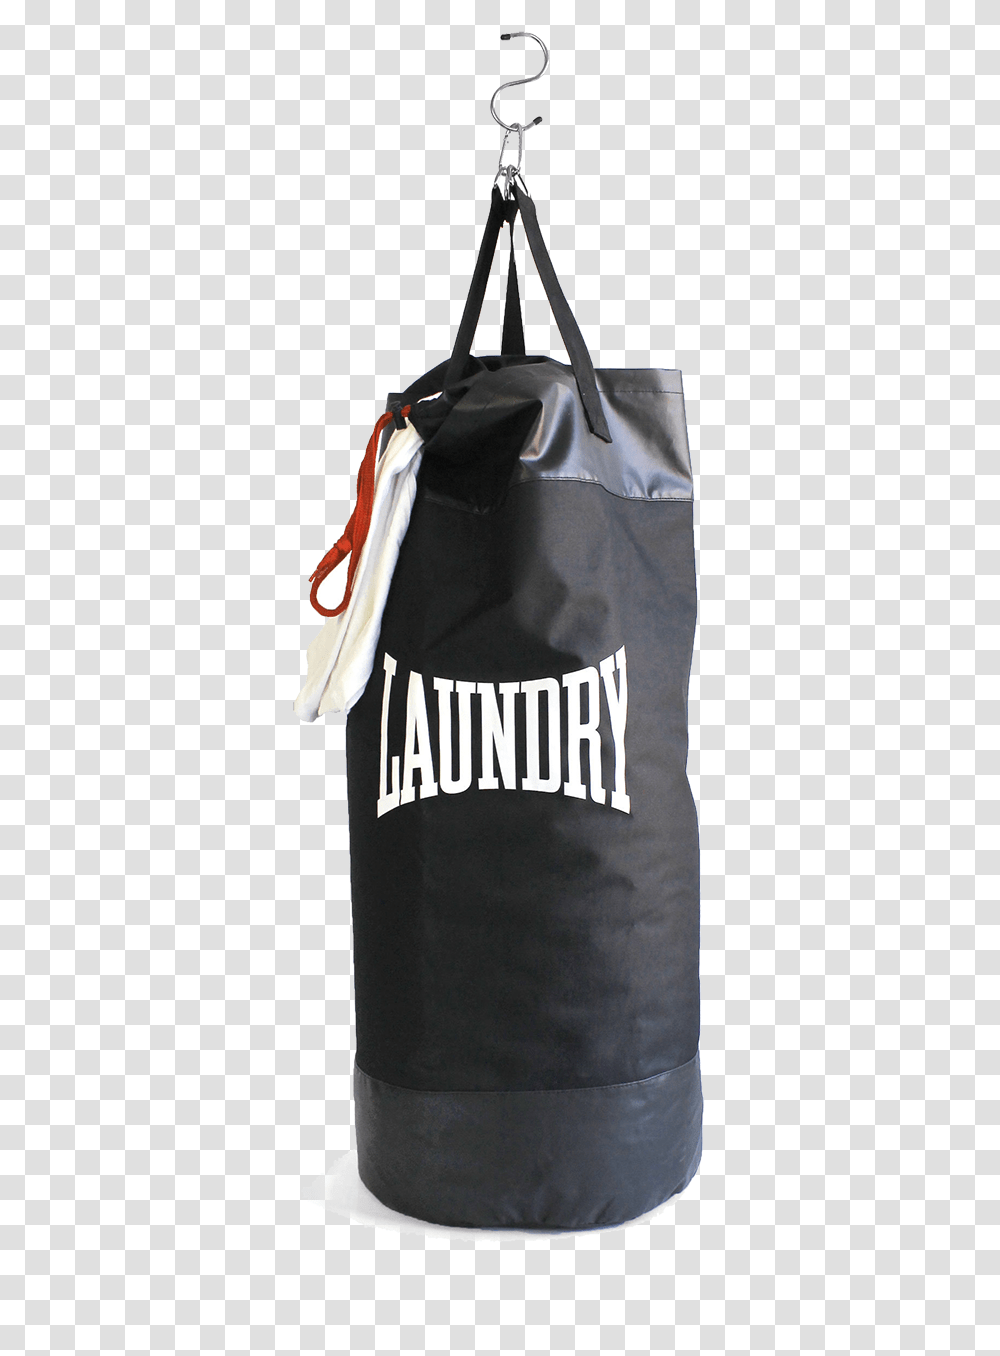 Boxing Gloves Hanging Laundry Basket Punching Bag, Handbag, Accessories, Accessory Transparent Png